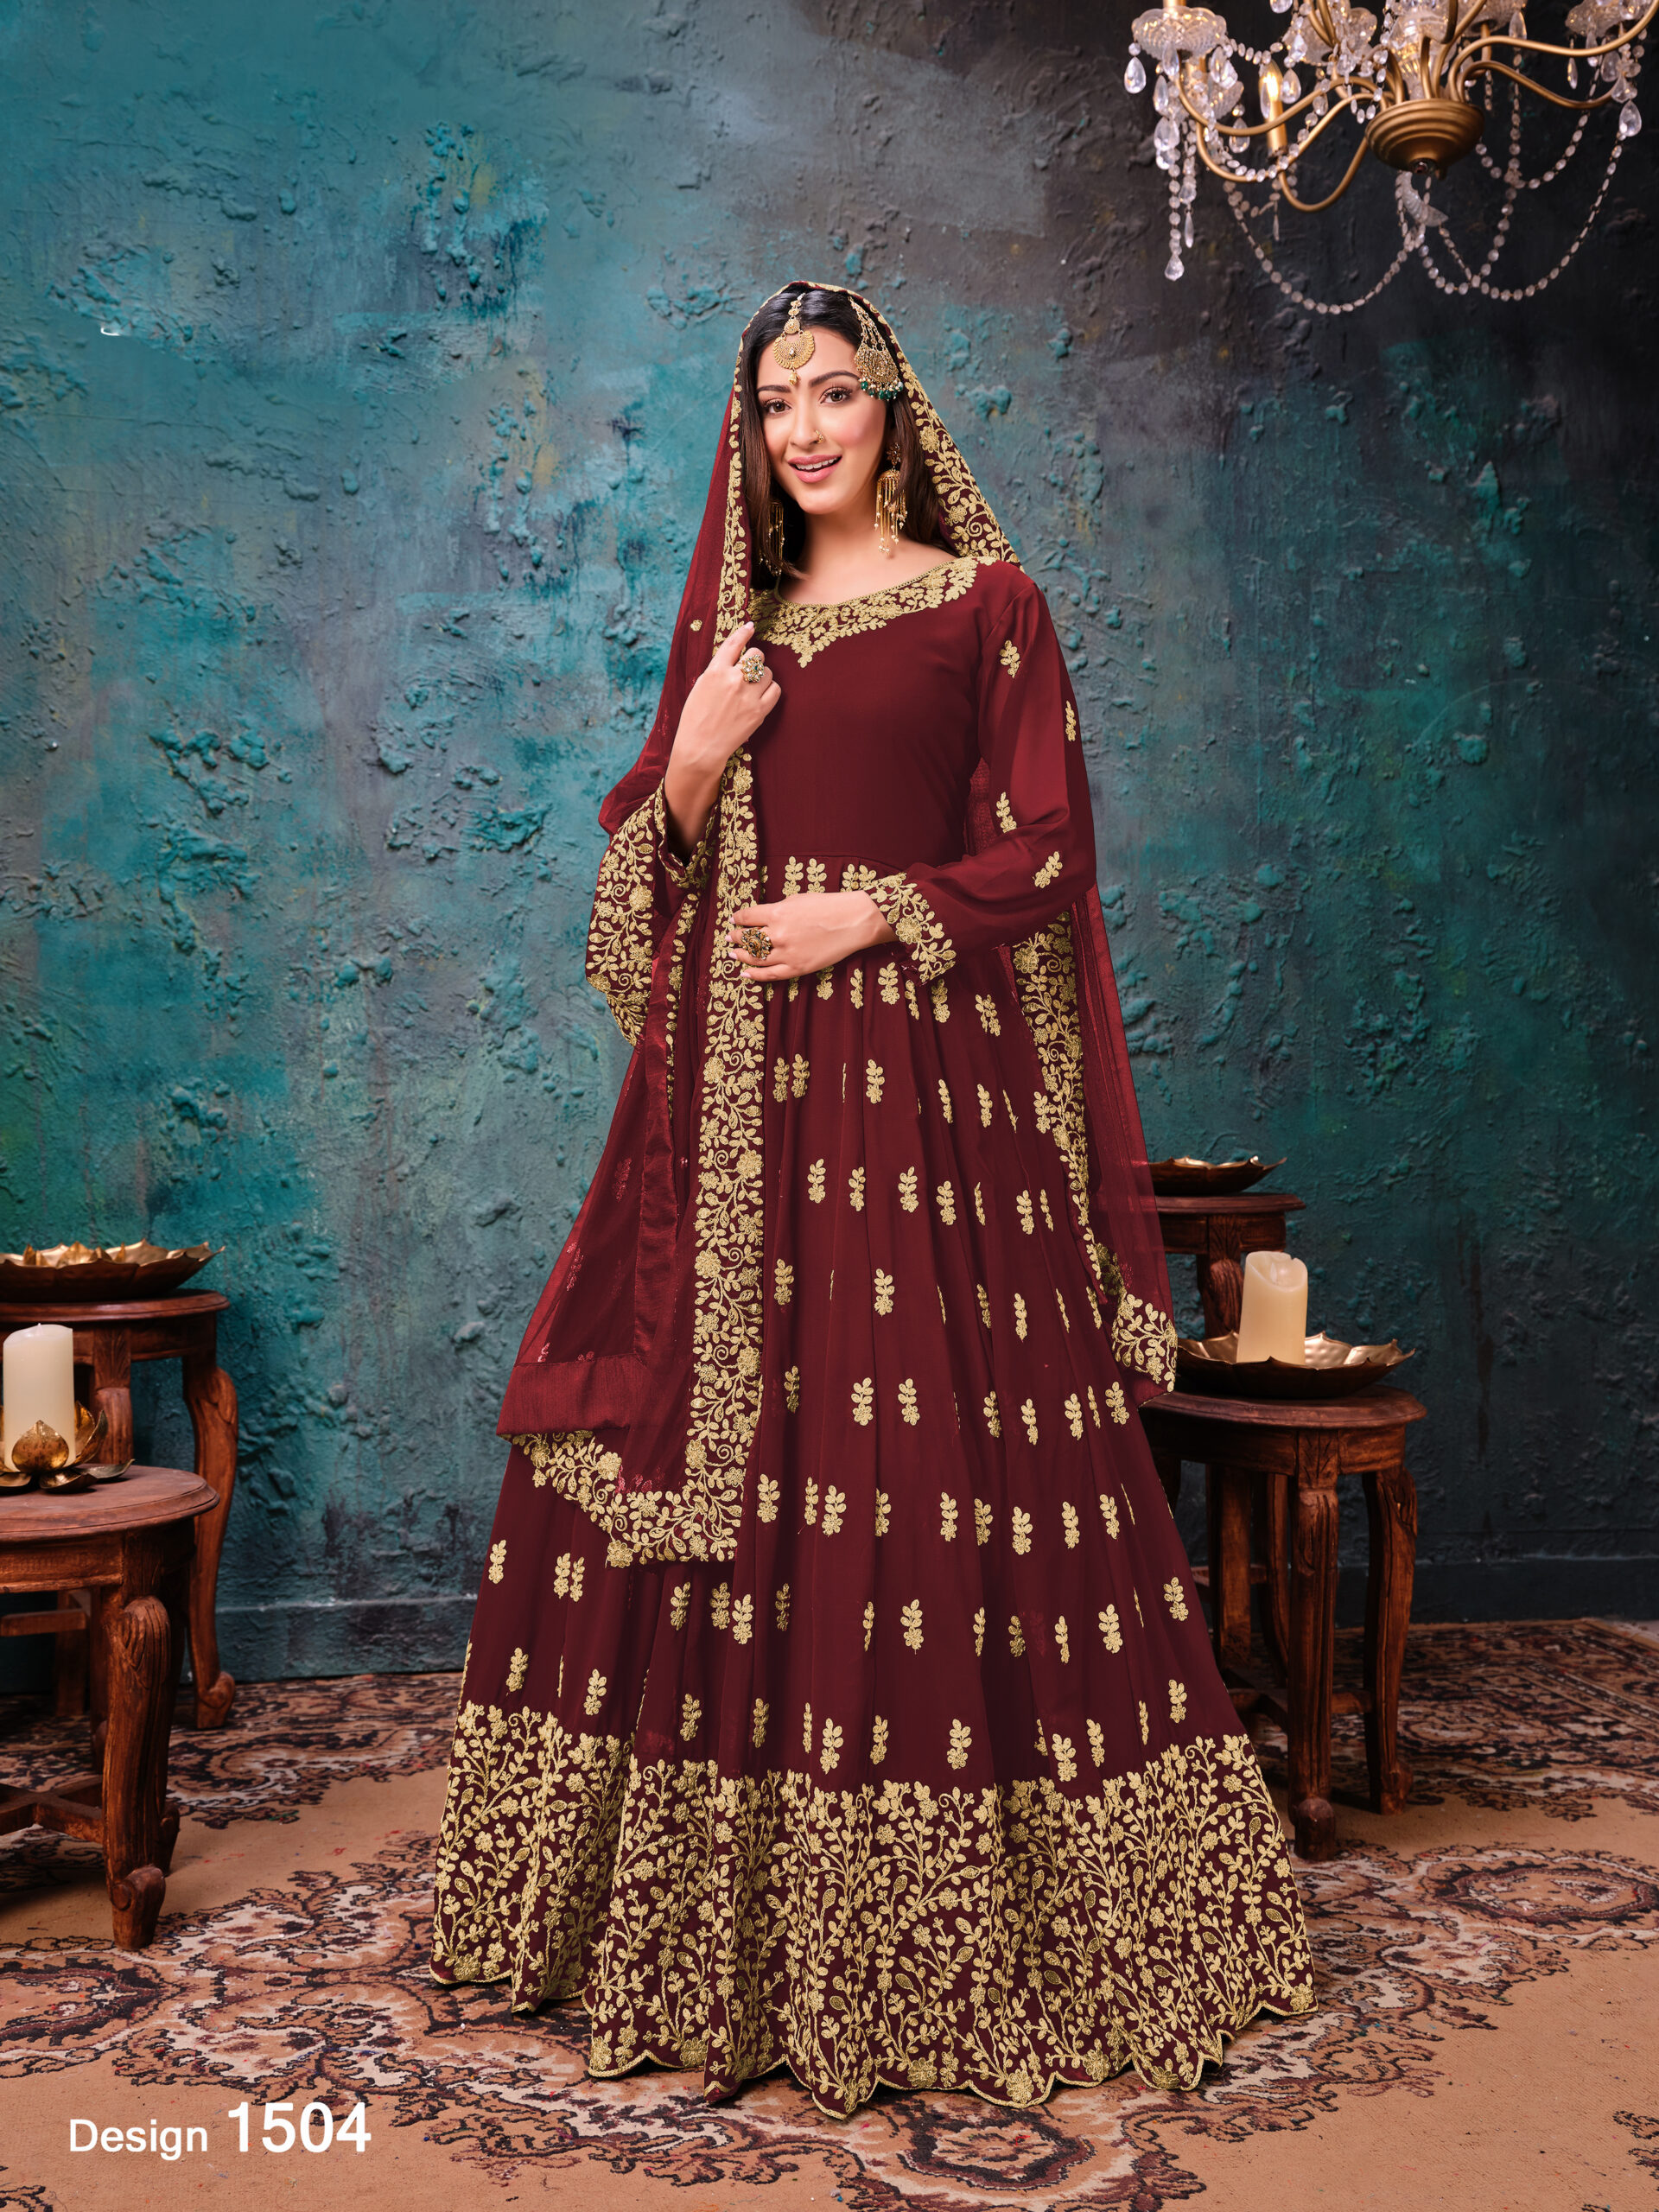 Buy Indian Wedding Dresses Online in USA | Latest Indian Wedding Outfits